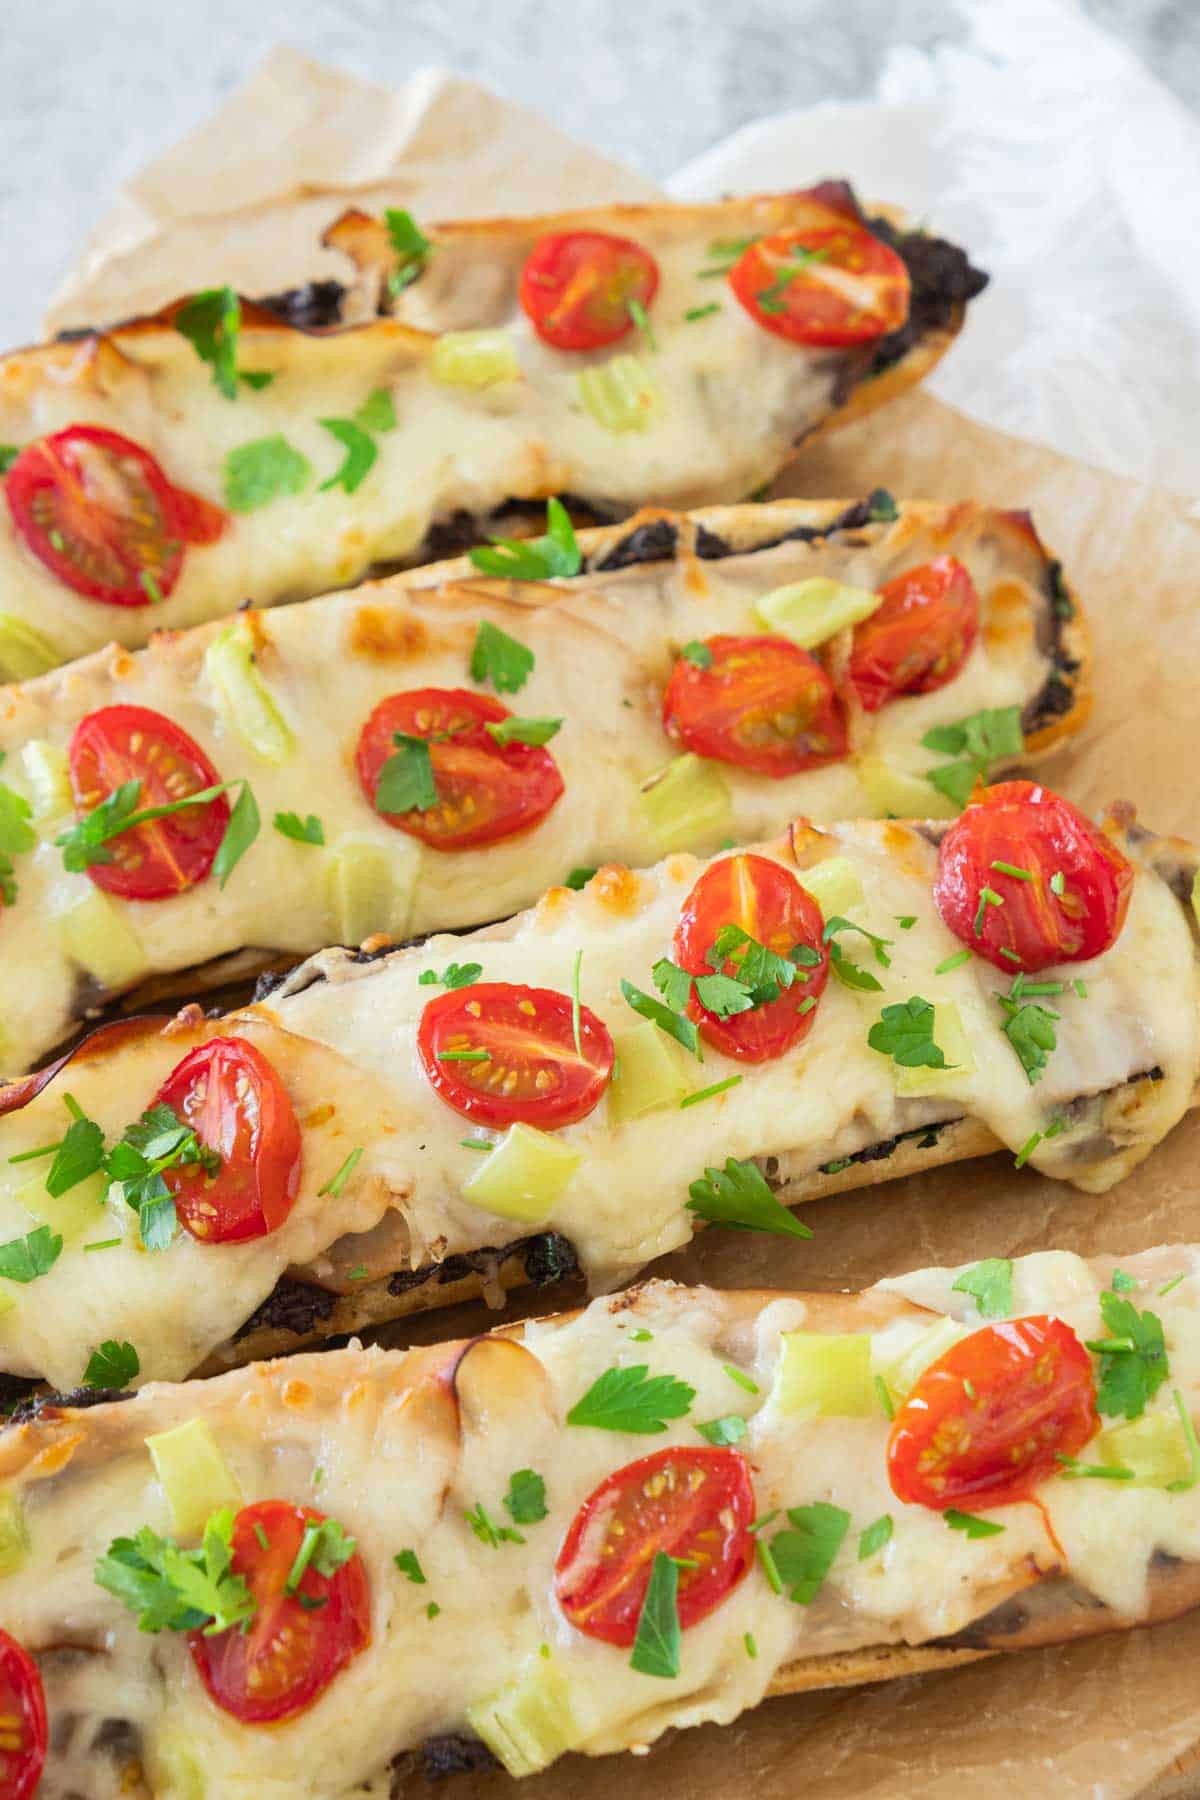 Cheese olive bread sticks with tomatoes and cheese.